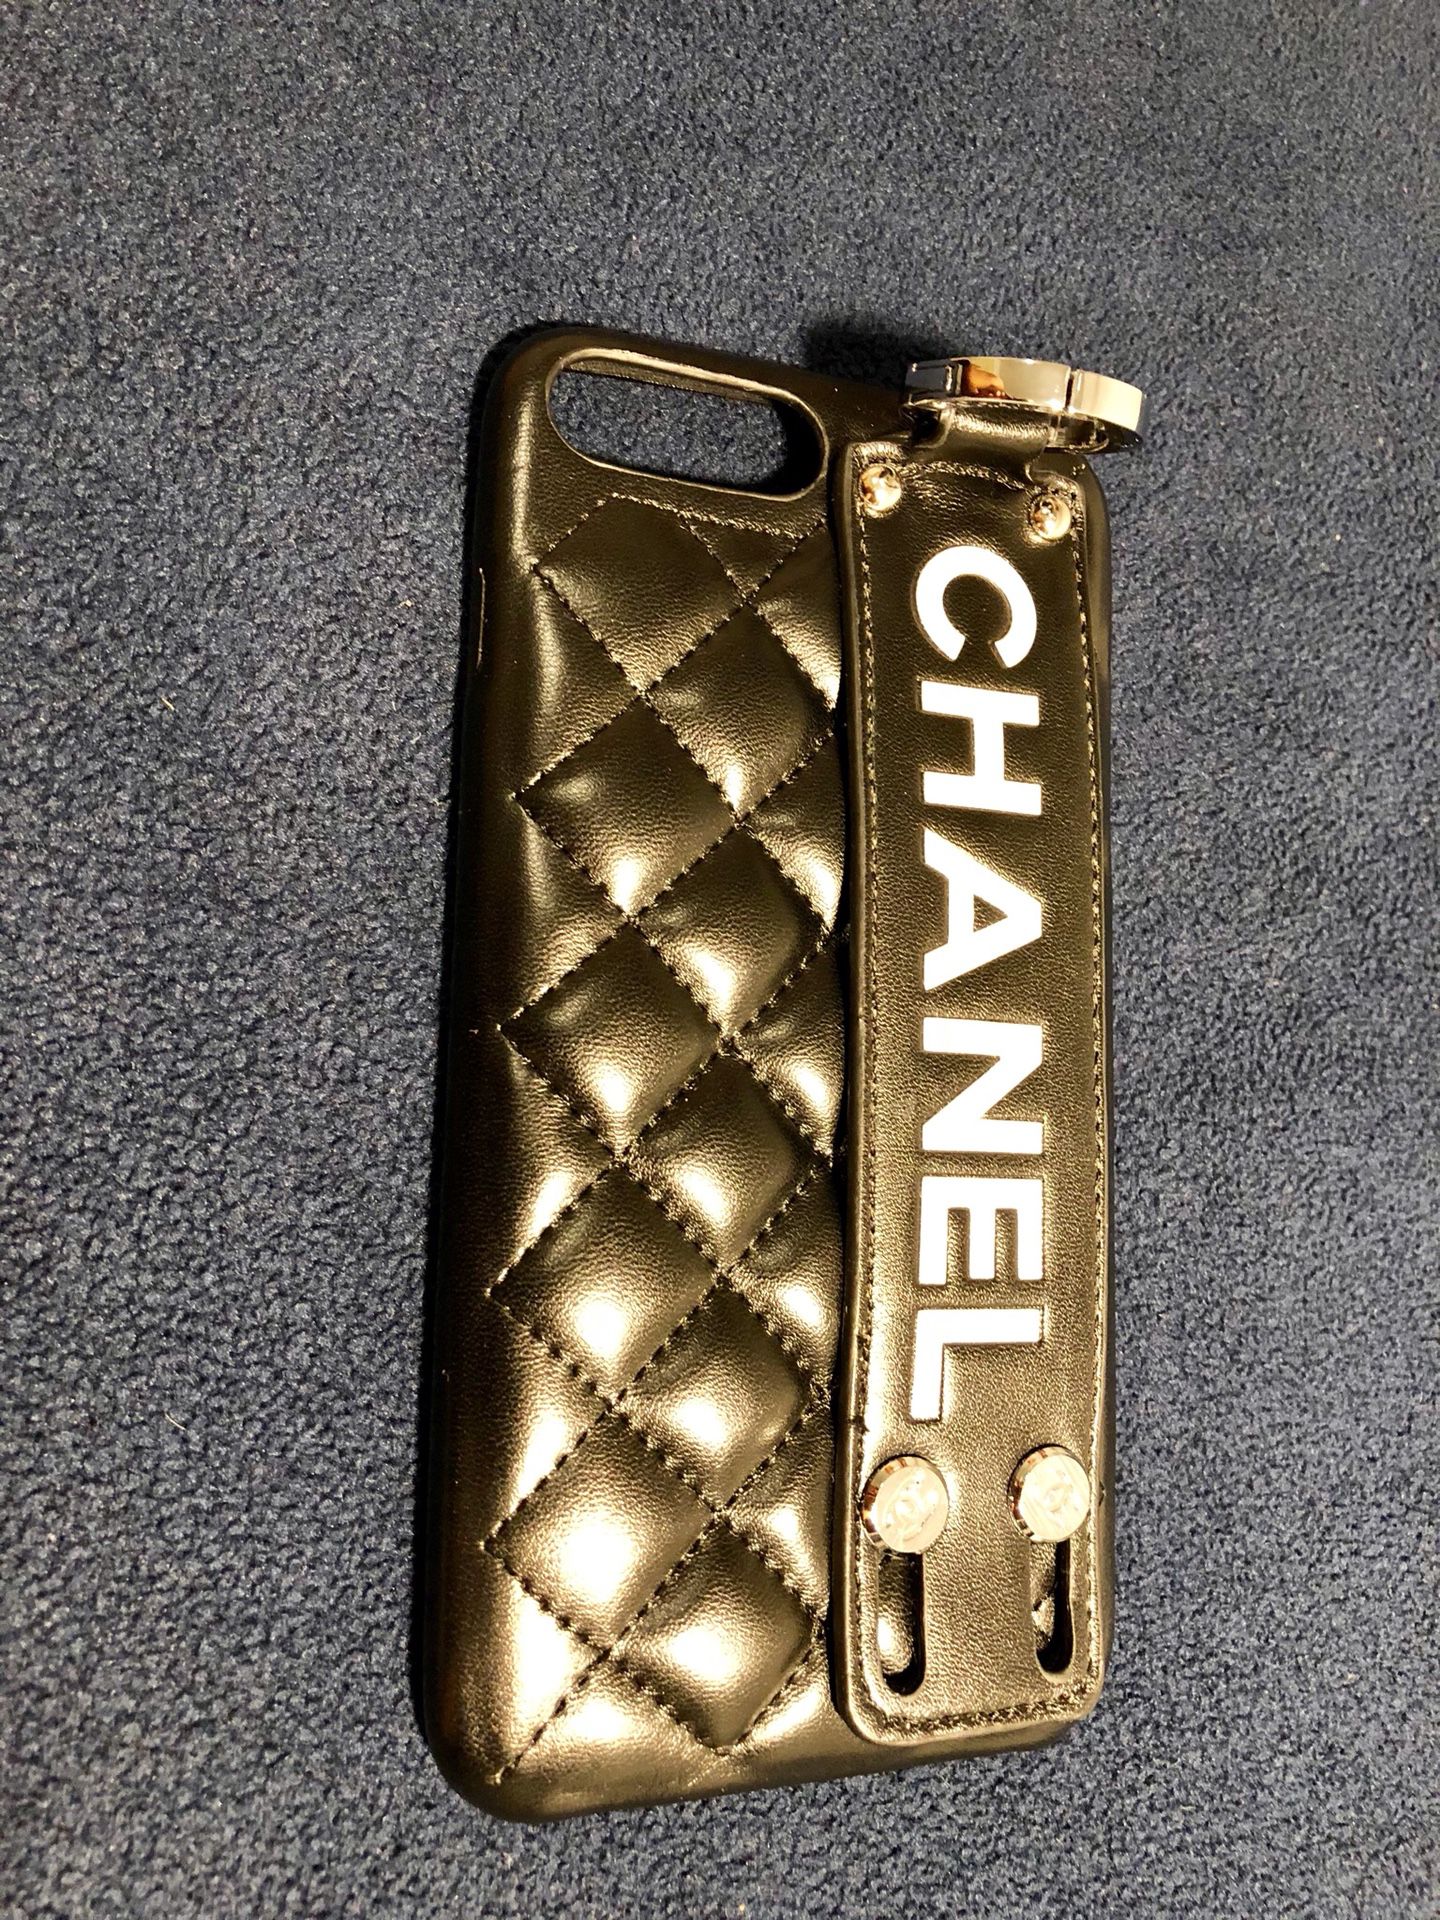 chanel phone case with strap